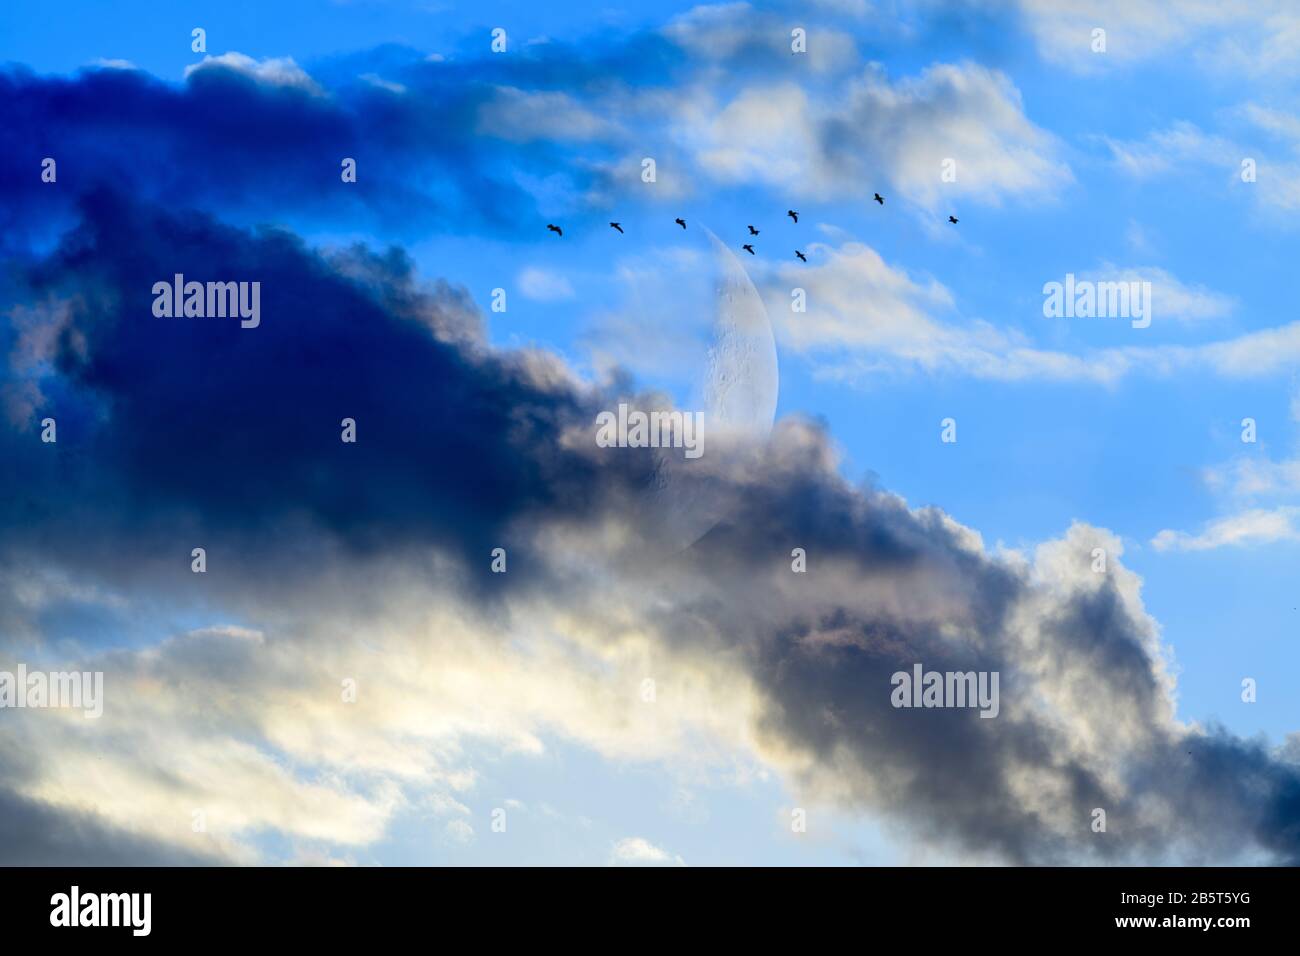 Full Moon Is Rising in the Night Sky While Birds are Silhouetted Against a Fantasy Like Cloudscape Stock Photo